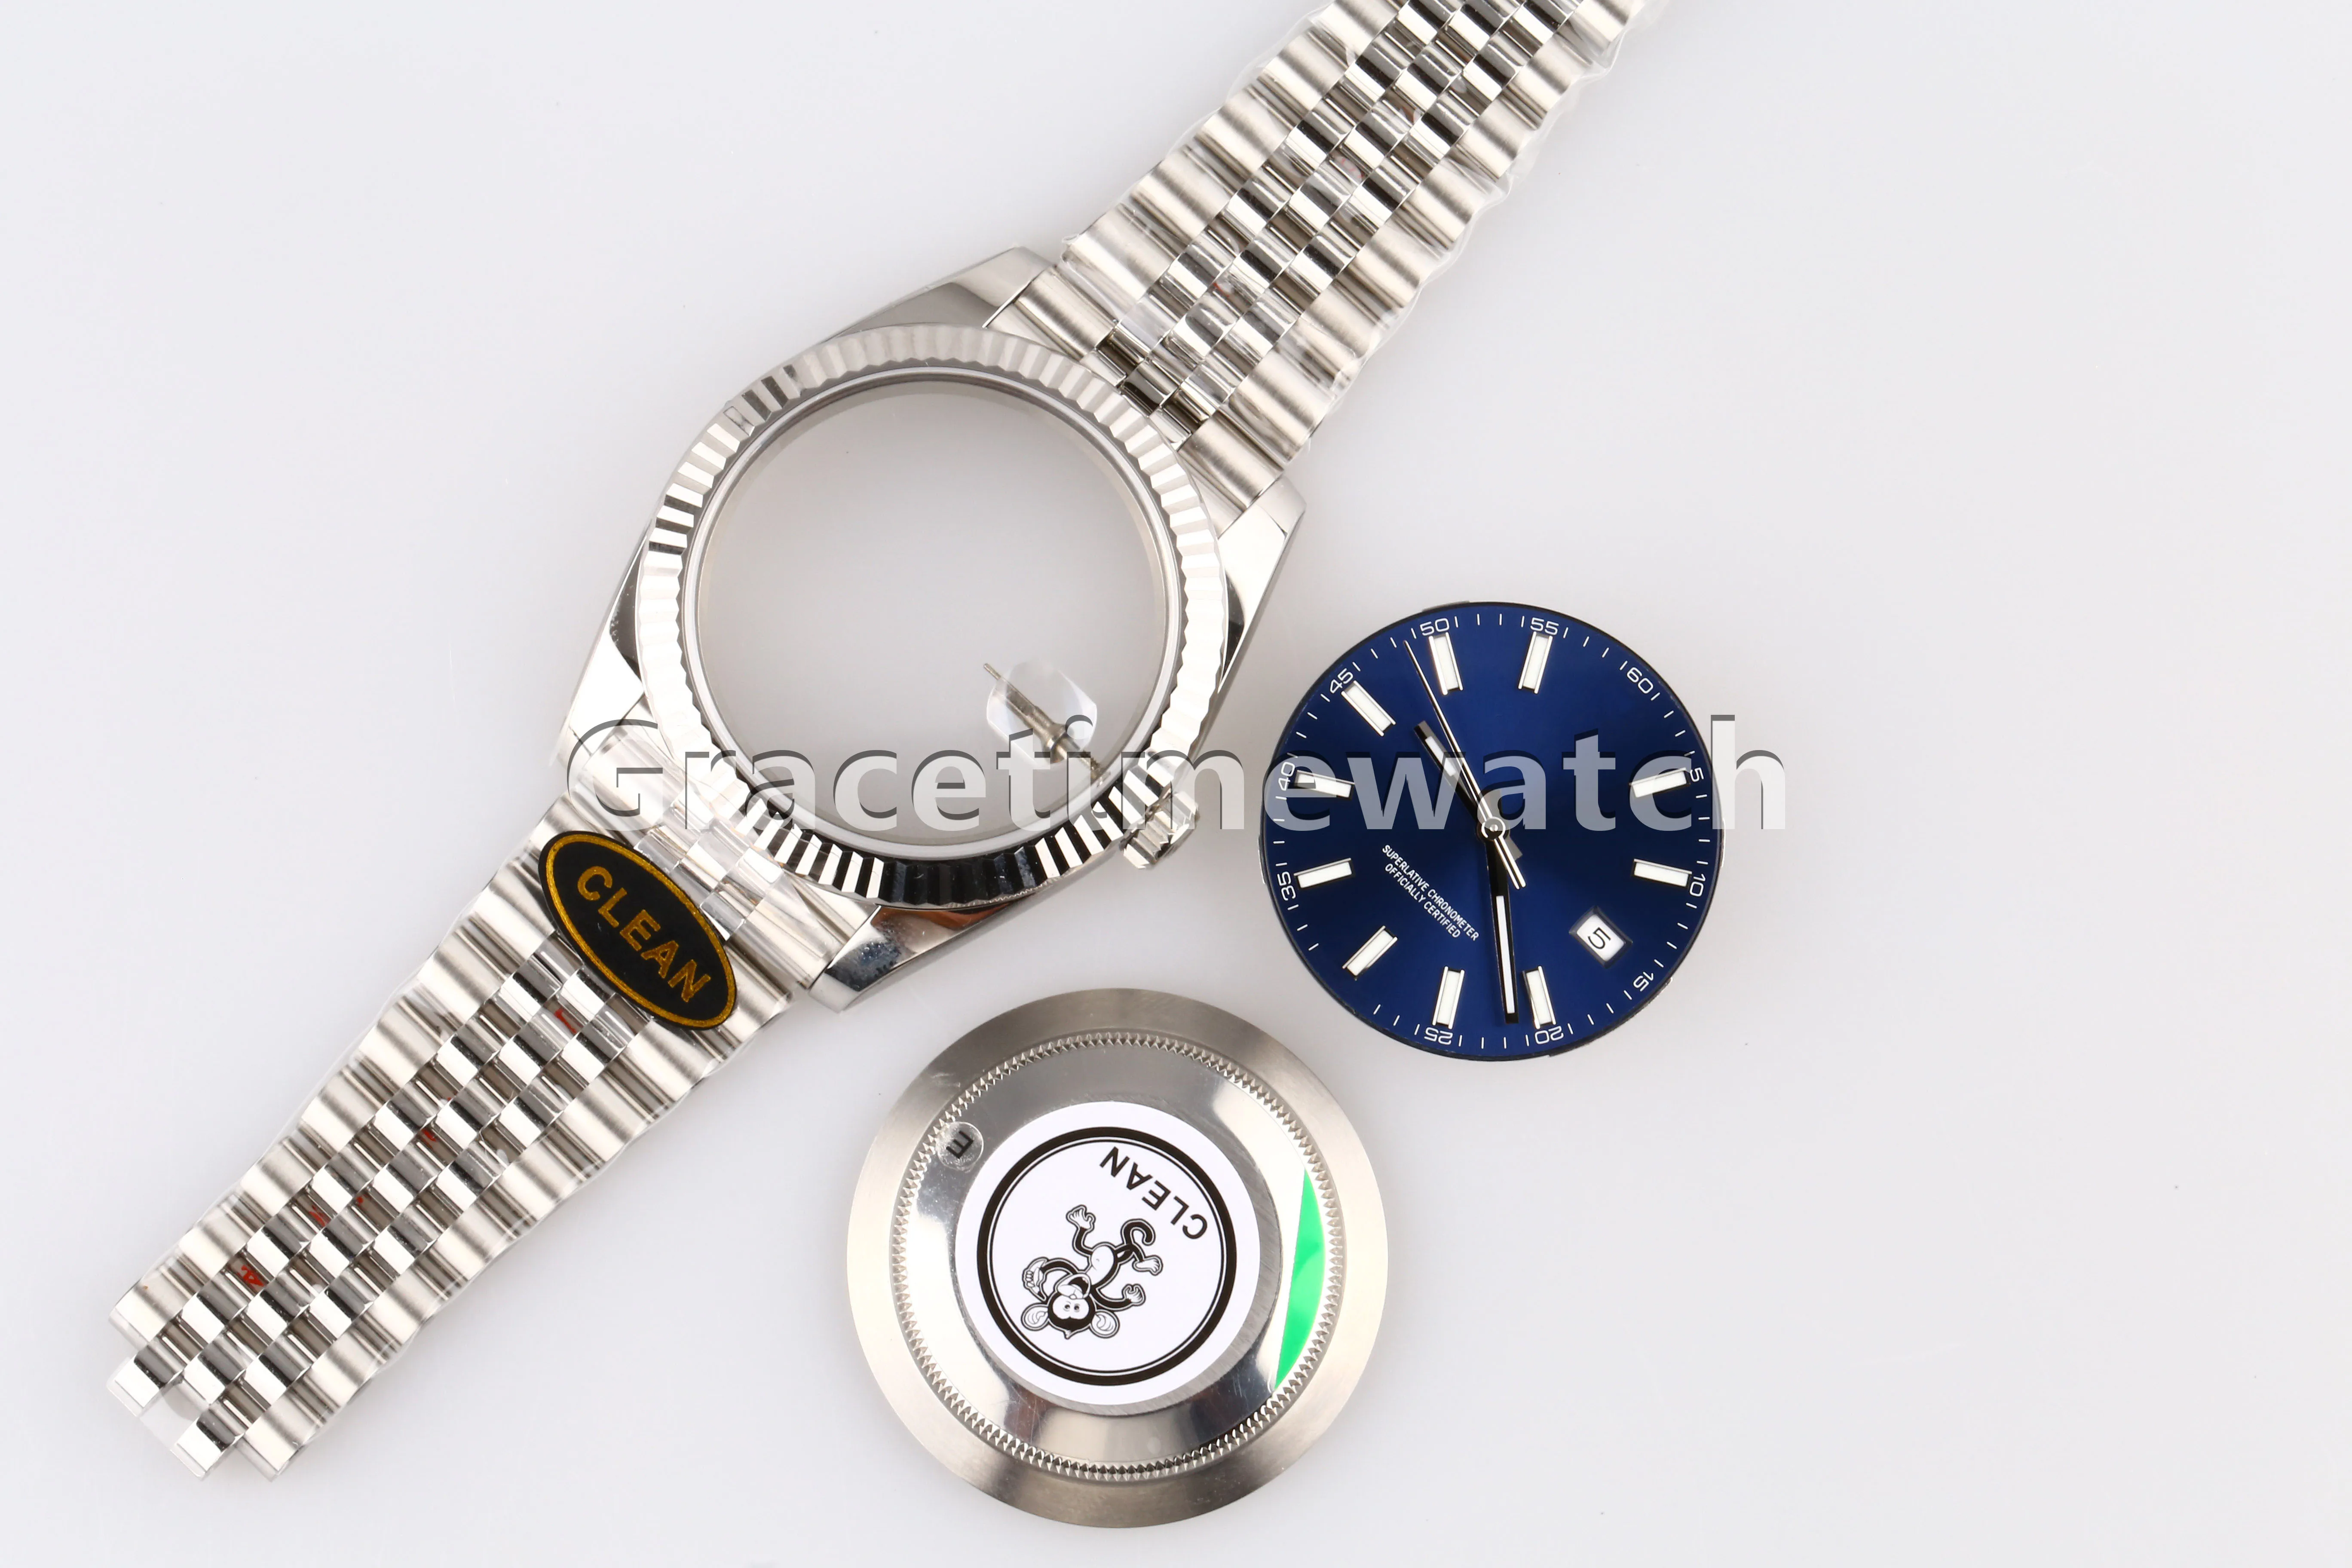 

Clean factory Luxury Mechanical Watch 41MM 126334 DateJust Super Perfect Quality Install VR3235 Movement 904L Steel for Men